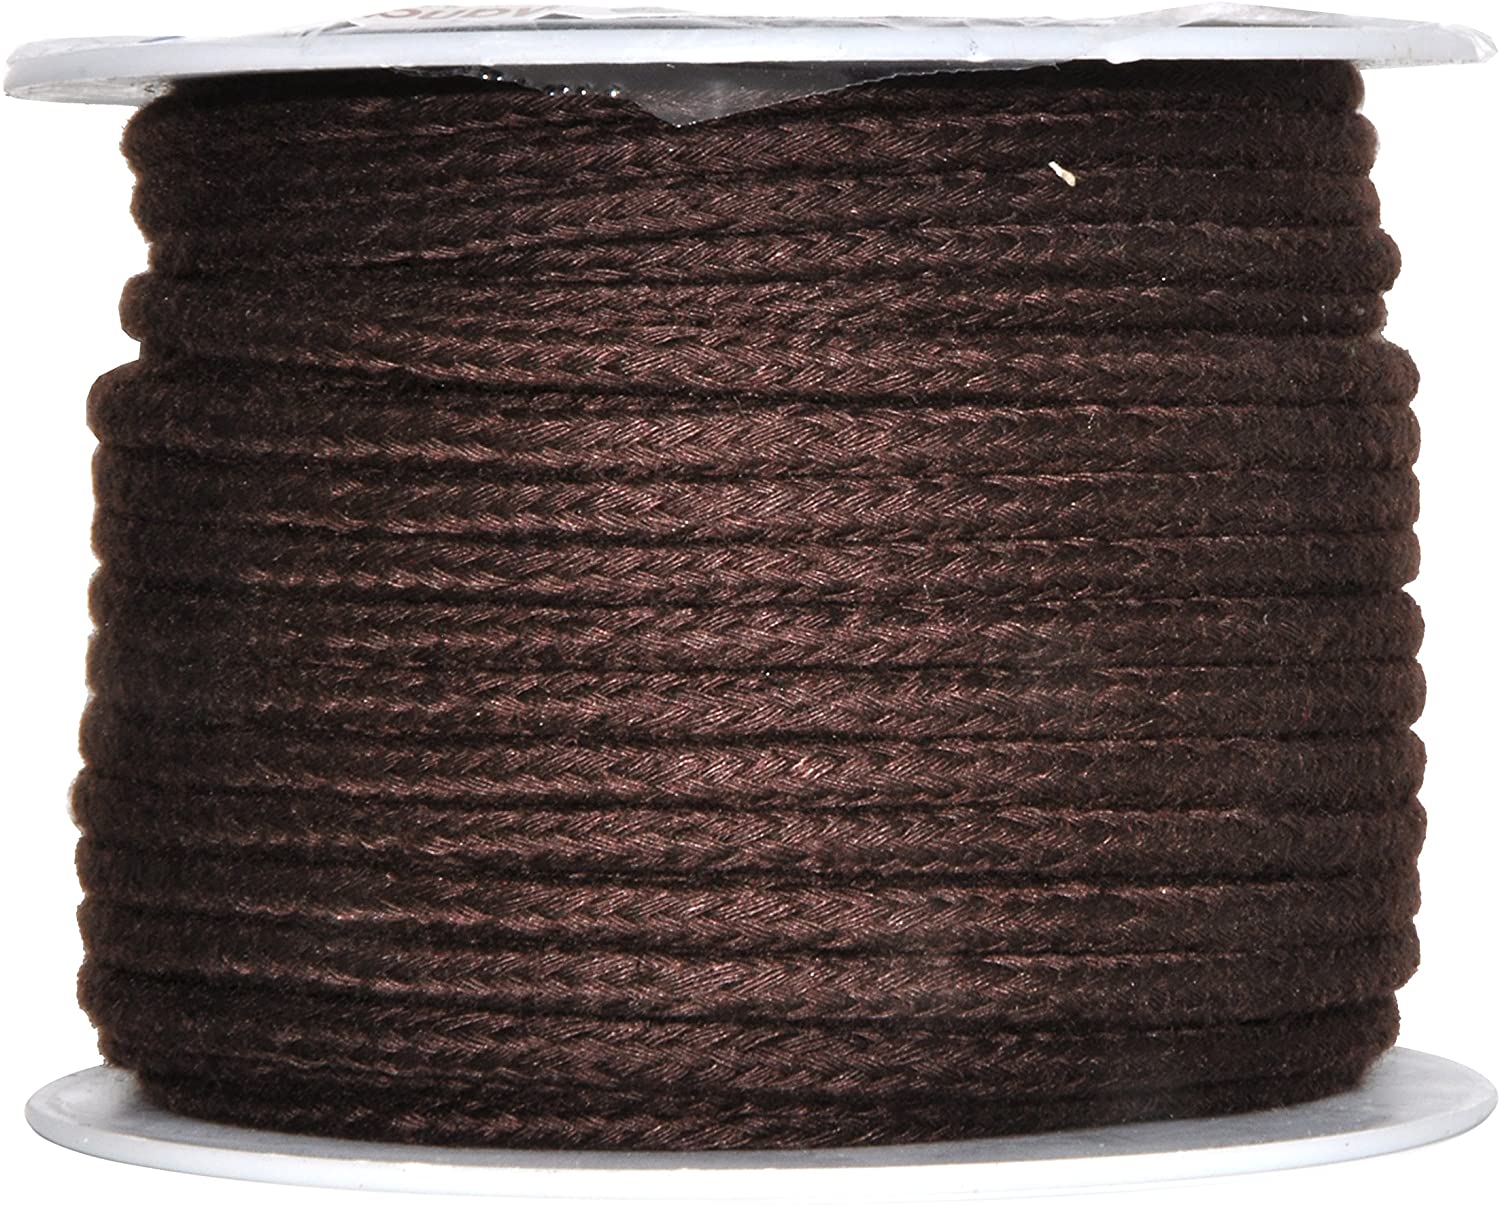 Mandala Crafts Soft Drawstring Replacement Rope Upholstery Crochet Macramé Cotton Welt Trim Piping Cord (Chocolate Brown, 4mm)